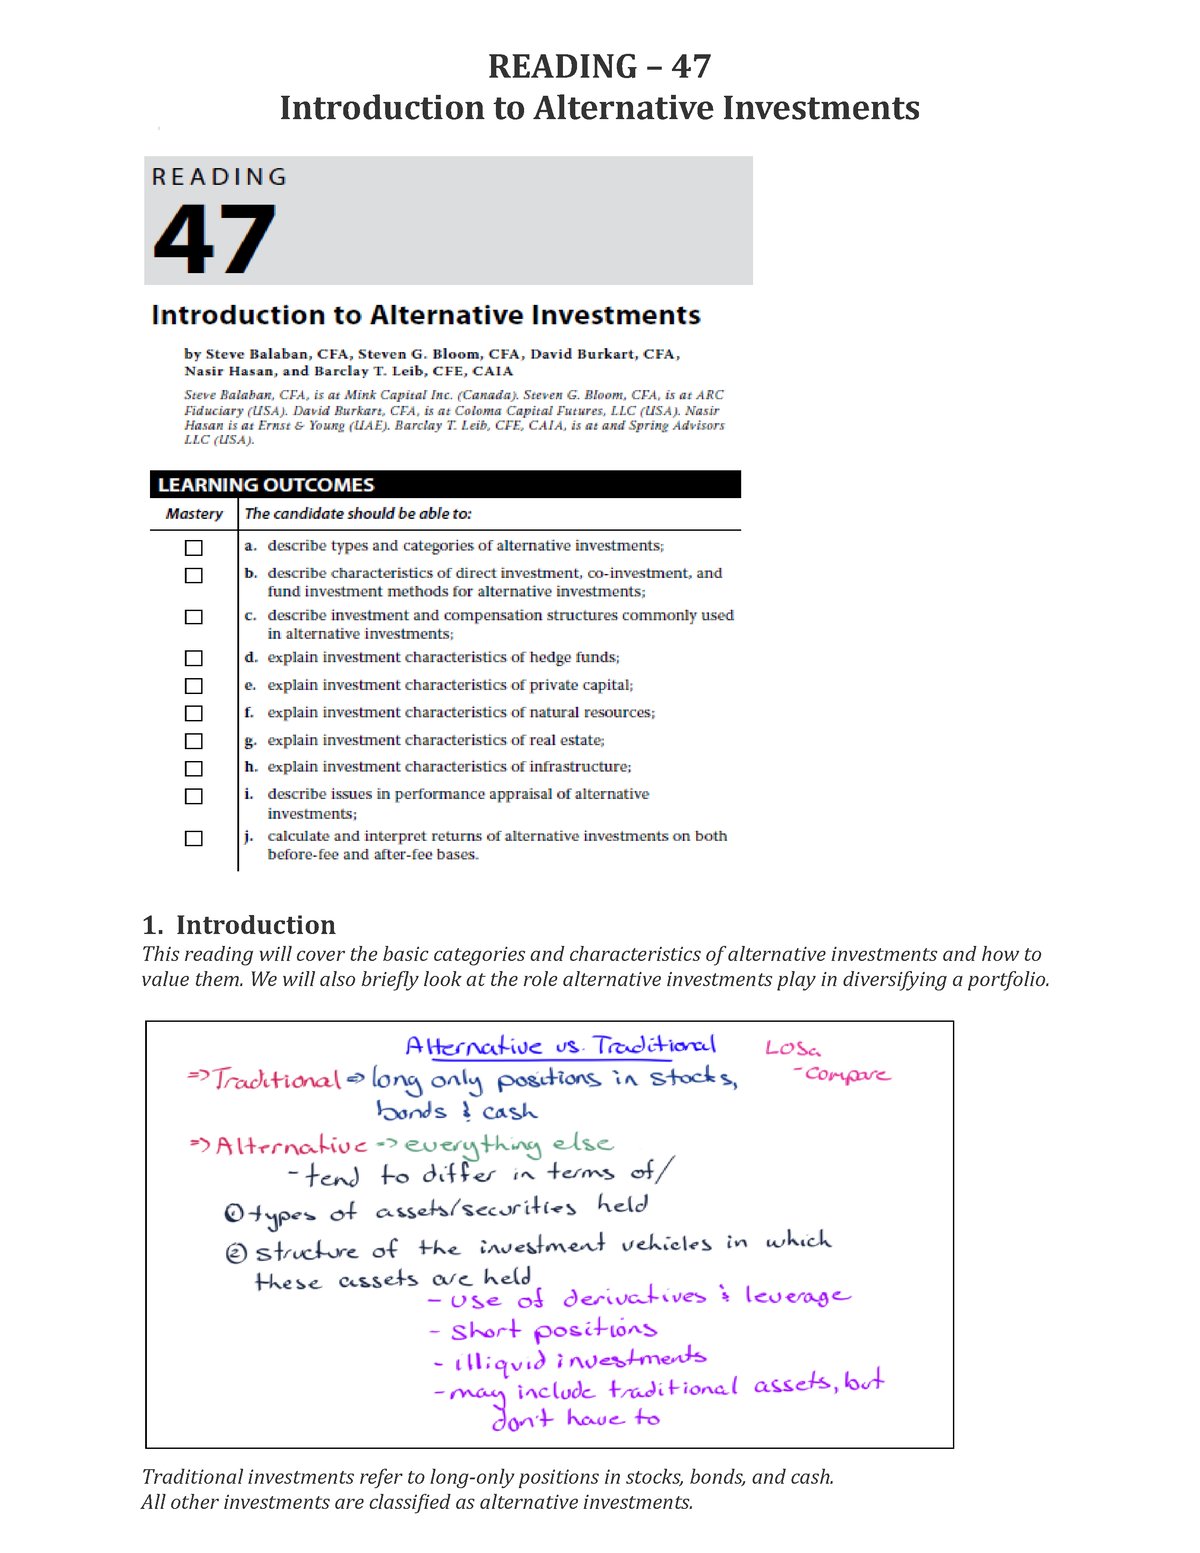 literature review on alternative investments